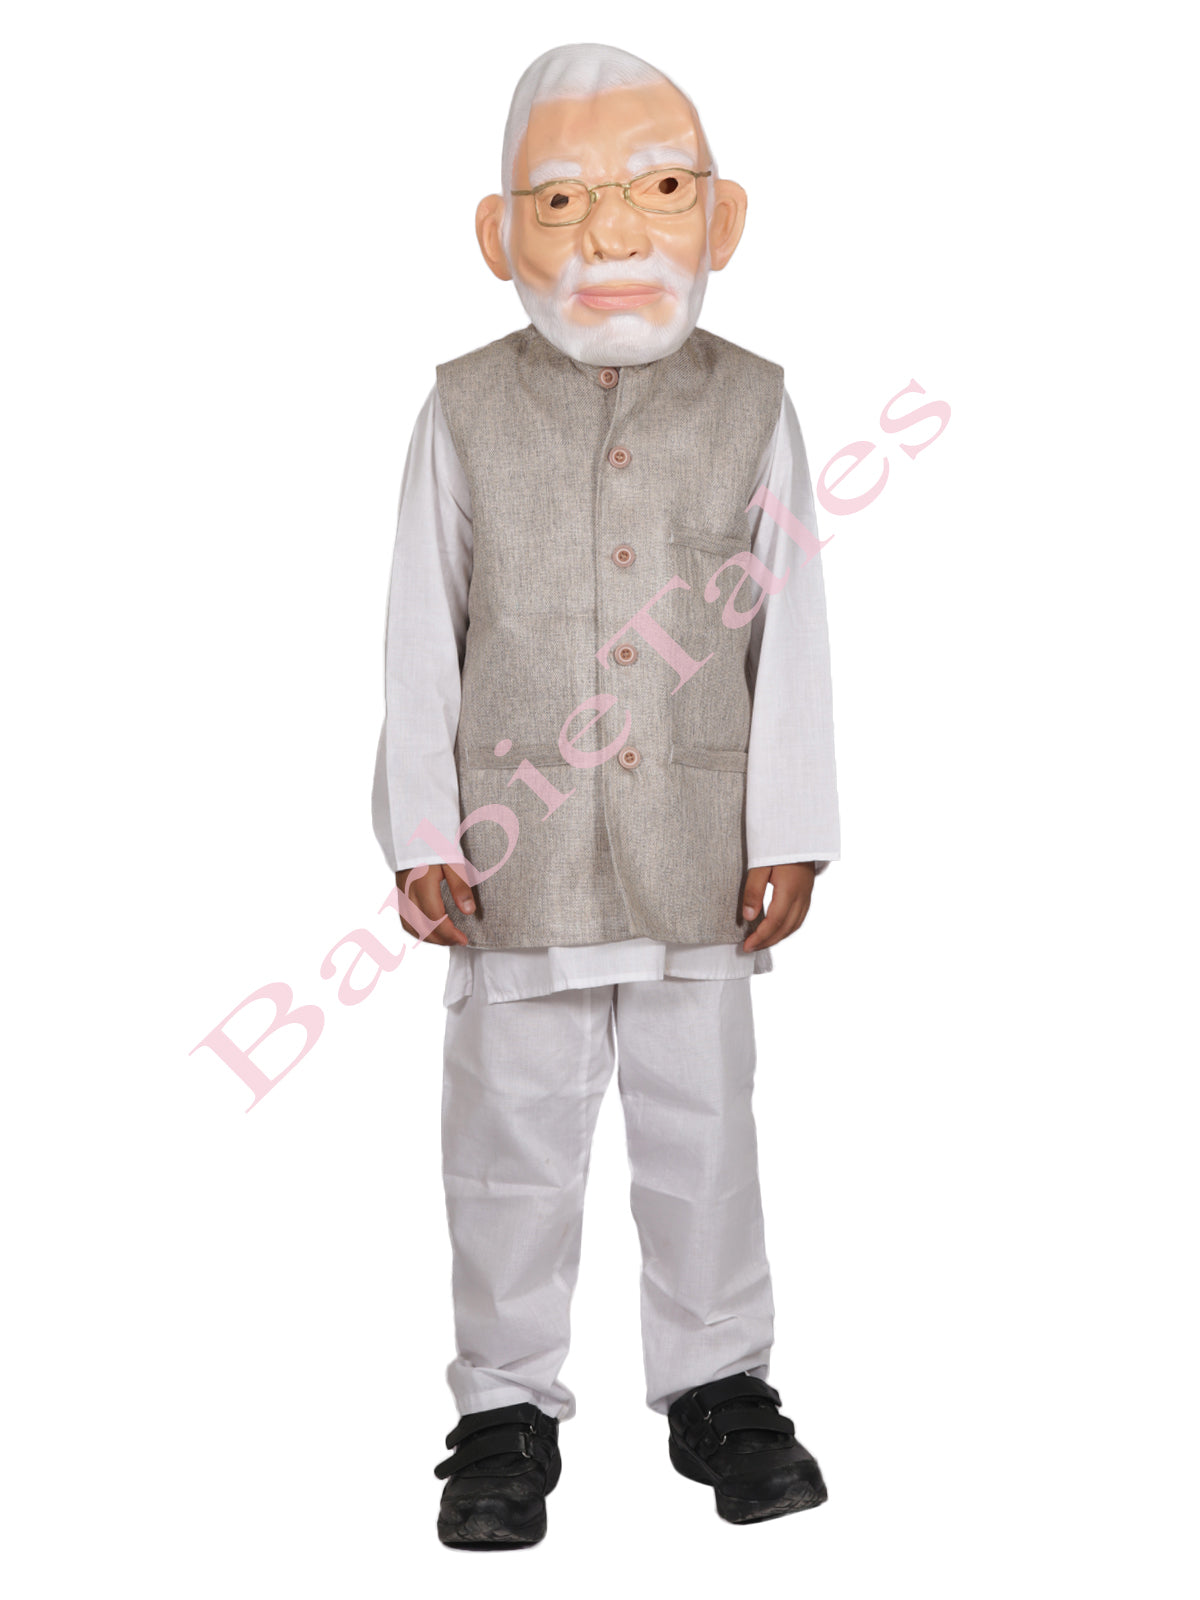 Fancy dress competition on the occasion of mother's Day Modi ji addresses  to The Nation Against 